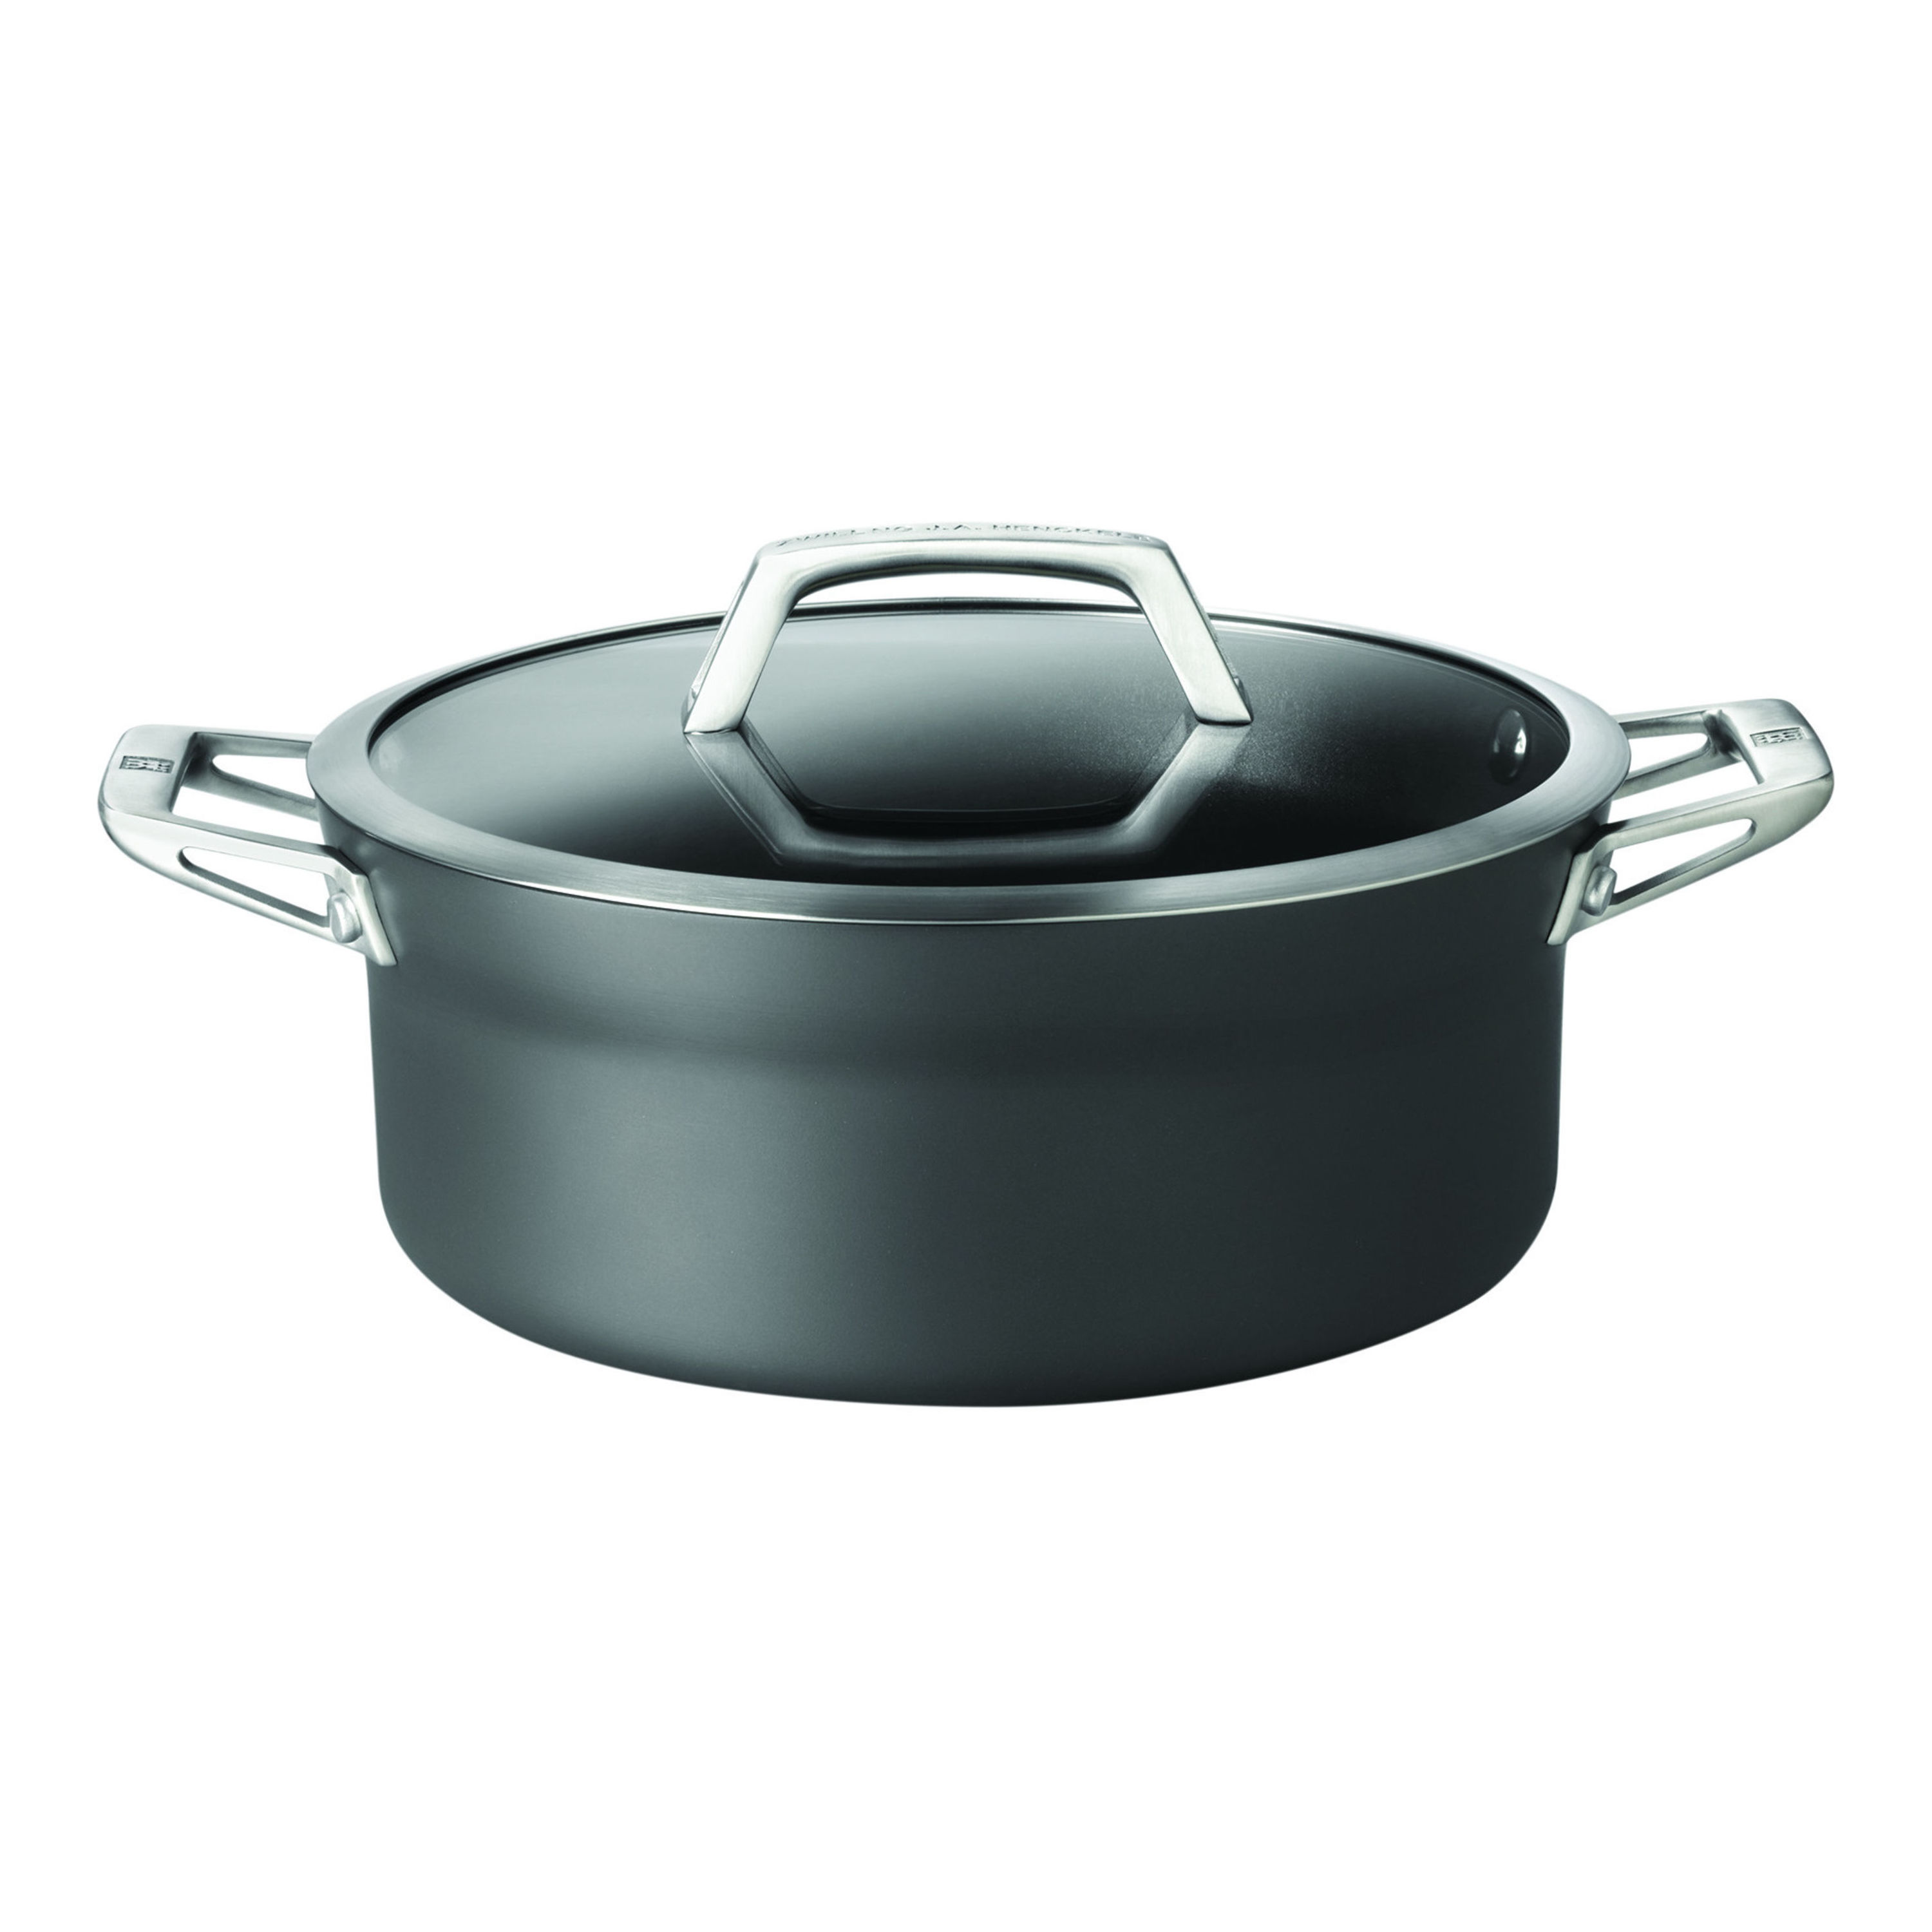 ZWILLING Madura Plus Forged 5-qt Aluminum Nonstick Dutch Oven with